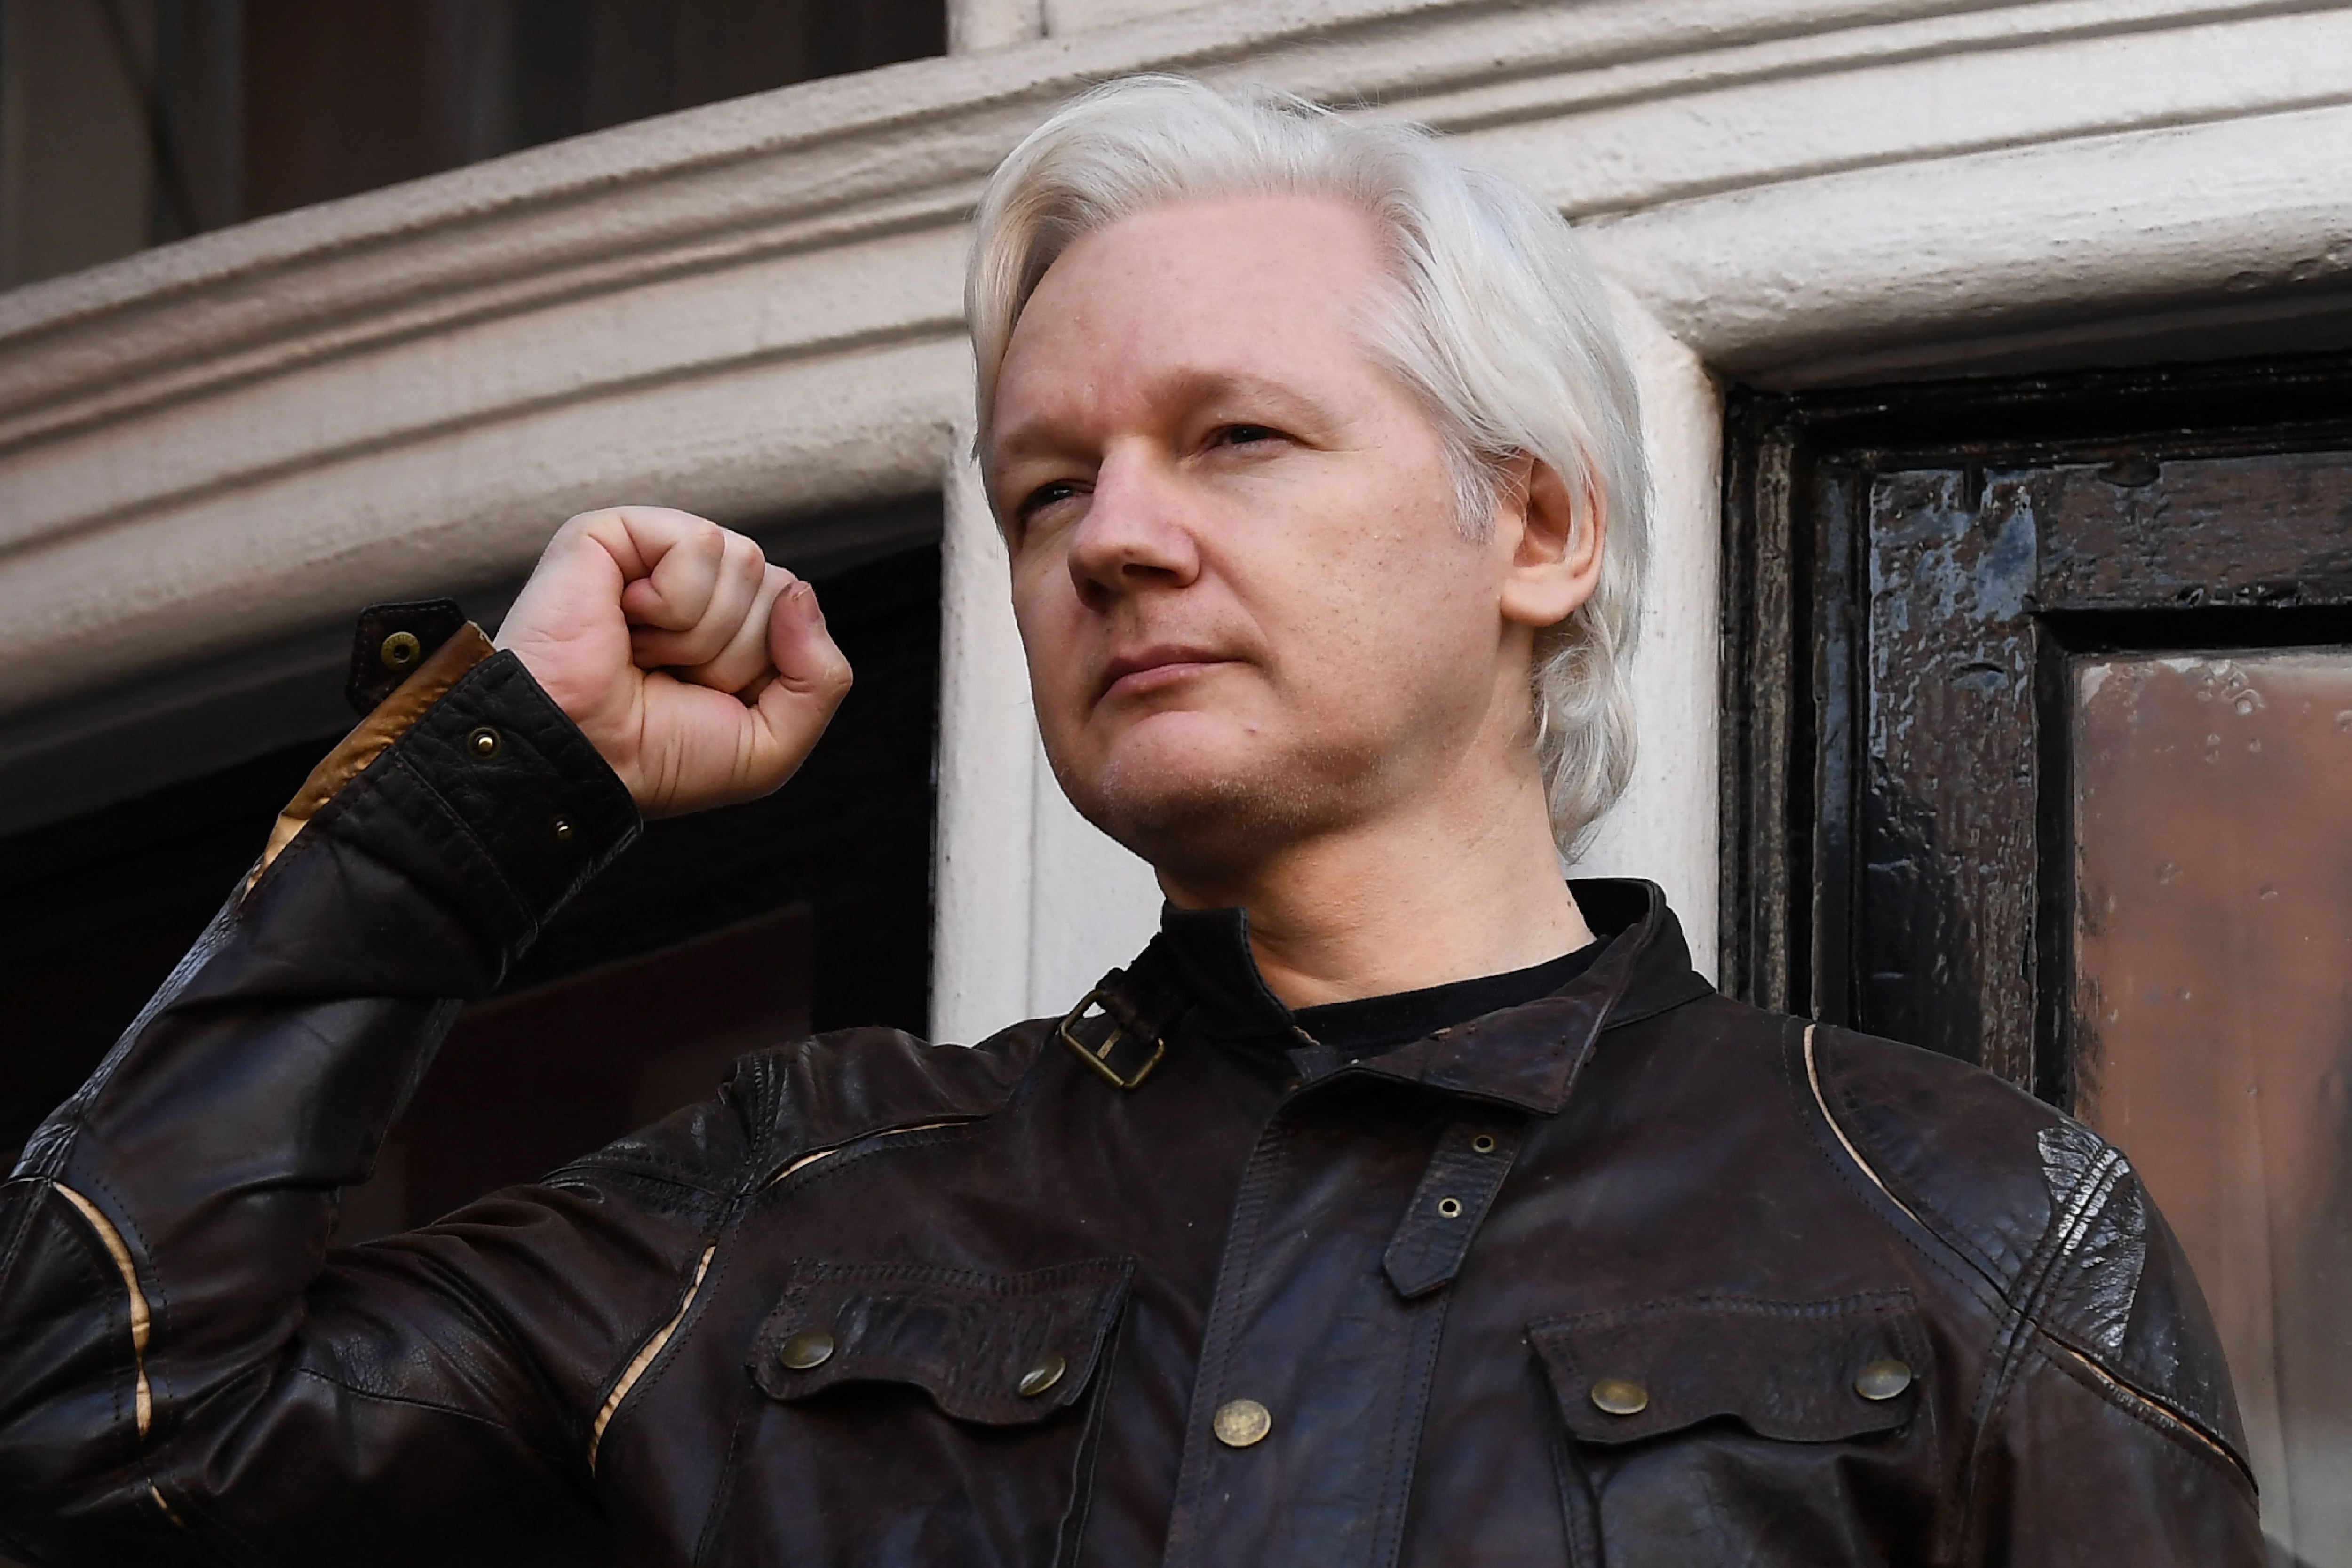 Wikileaks founder Julian Assange raises his fist before addressing the media on the balcony of the Ecuadorian Embassy in London on May 19, 2017. (Photo by Justin TALLIS/AFP).